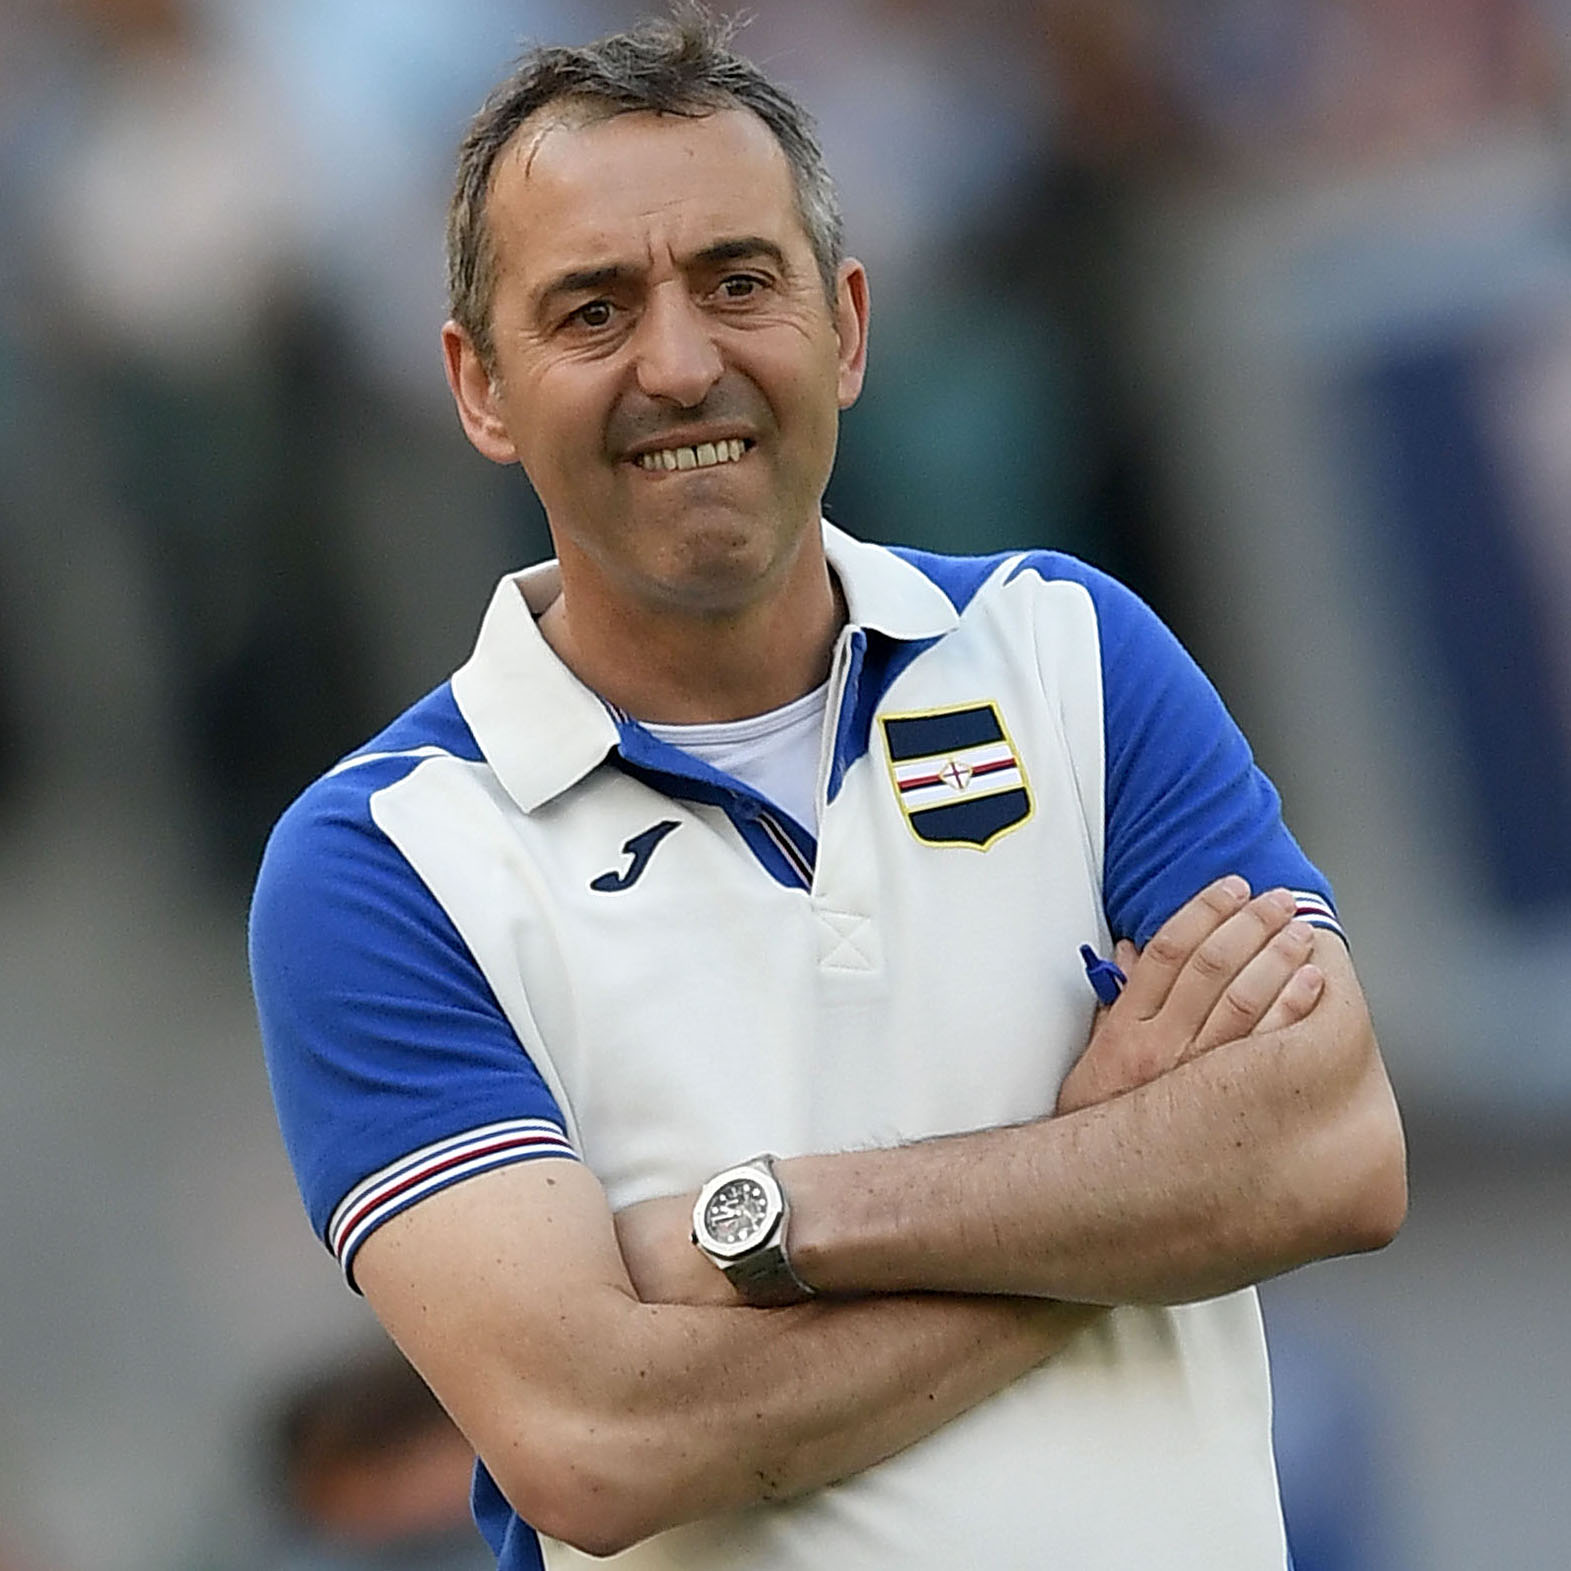 Giampaolo issues rallying call: “We must compete against ourselves.”